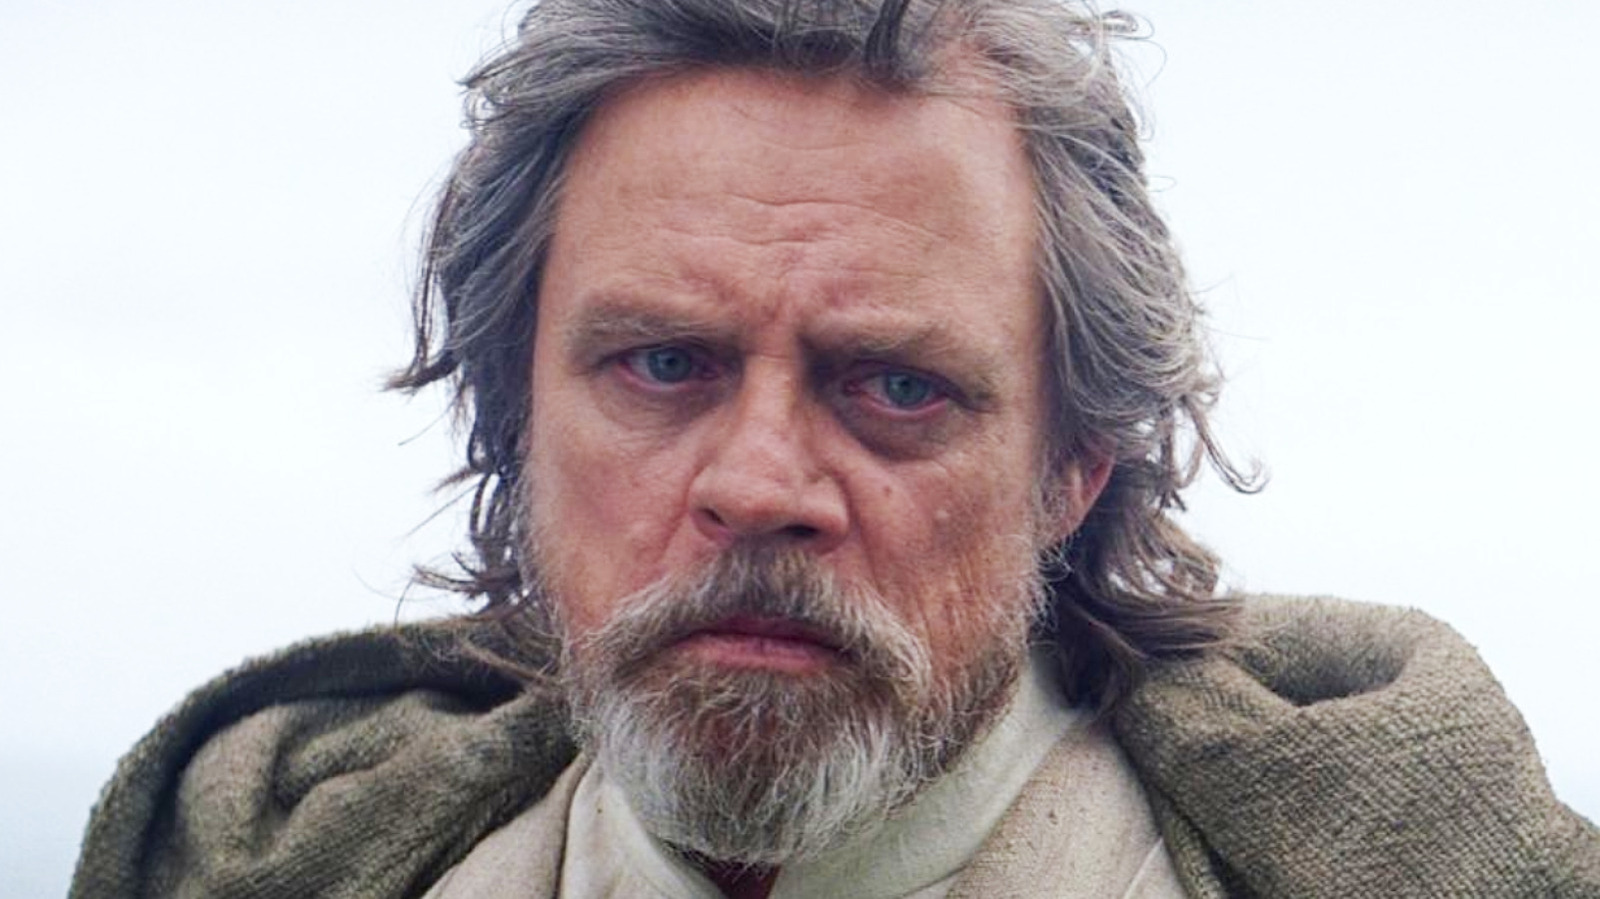 Mark Hamill Reacts to New Luke Skywalker Actor Casting